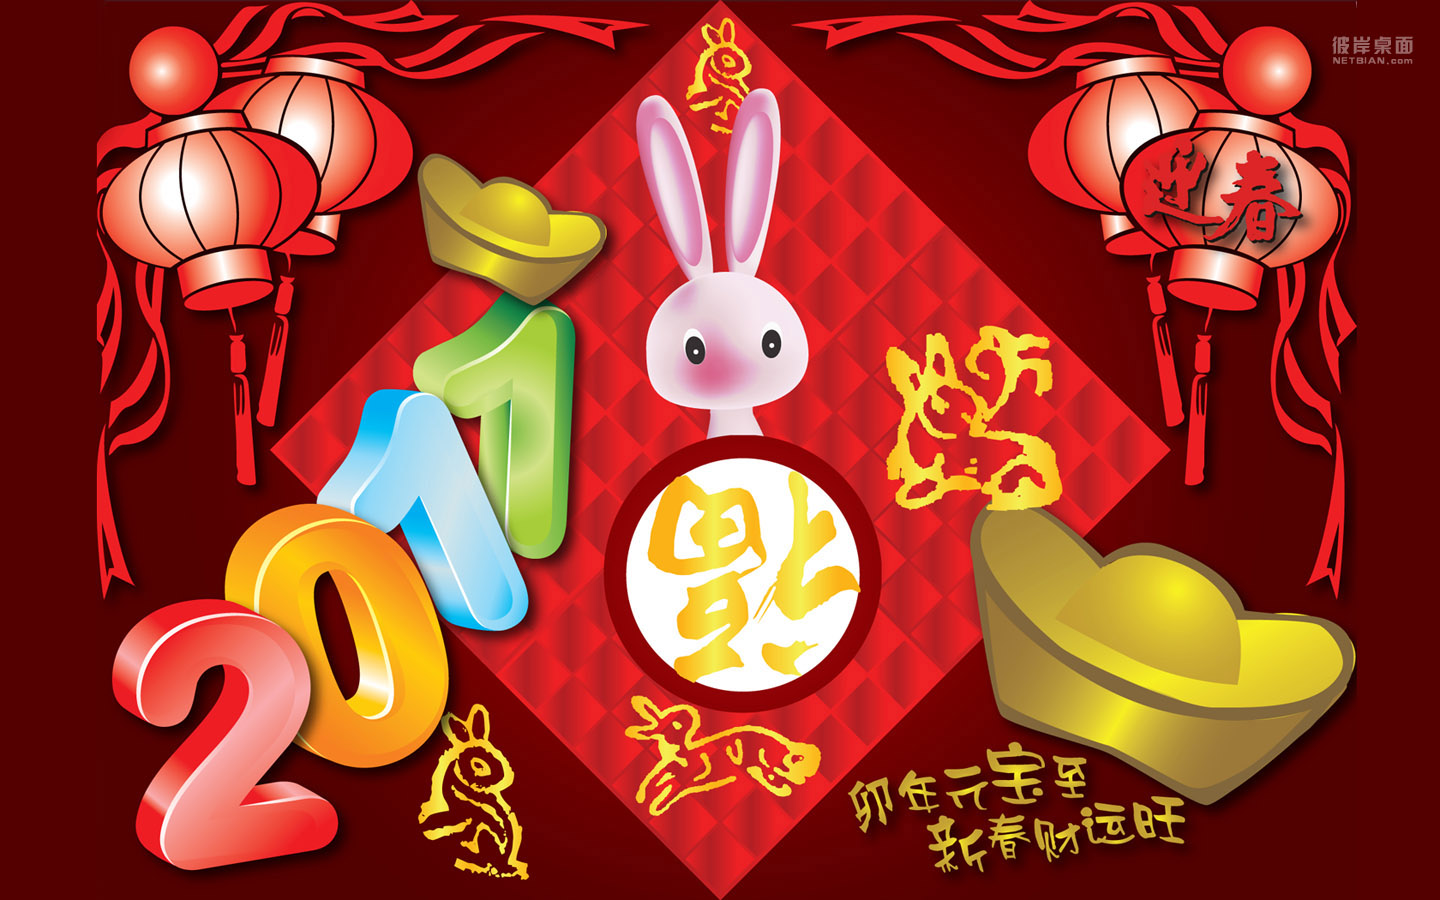 The Year of the Rabbit 2011 Spring Festival Computer Wallpaper